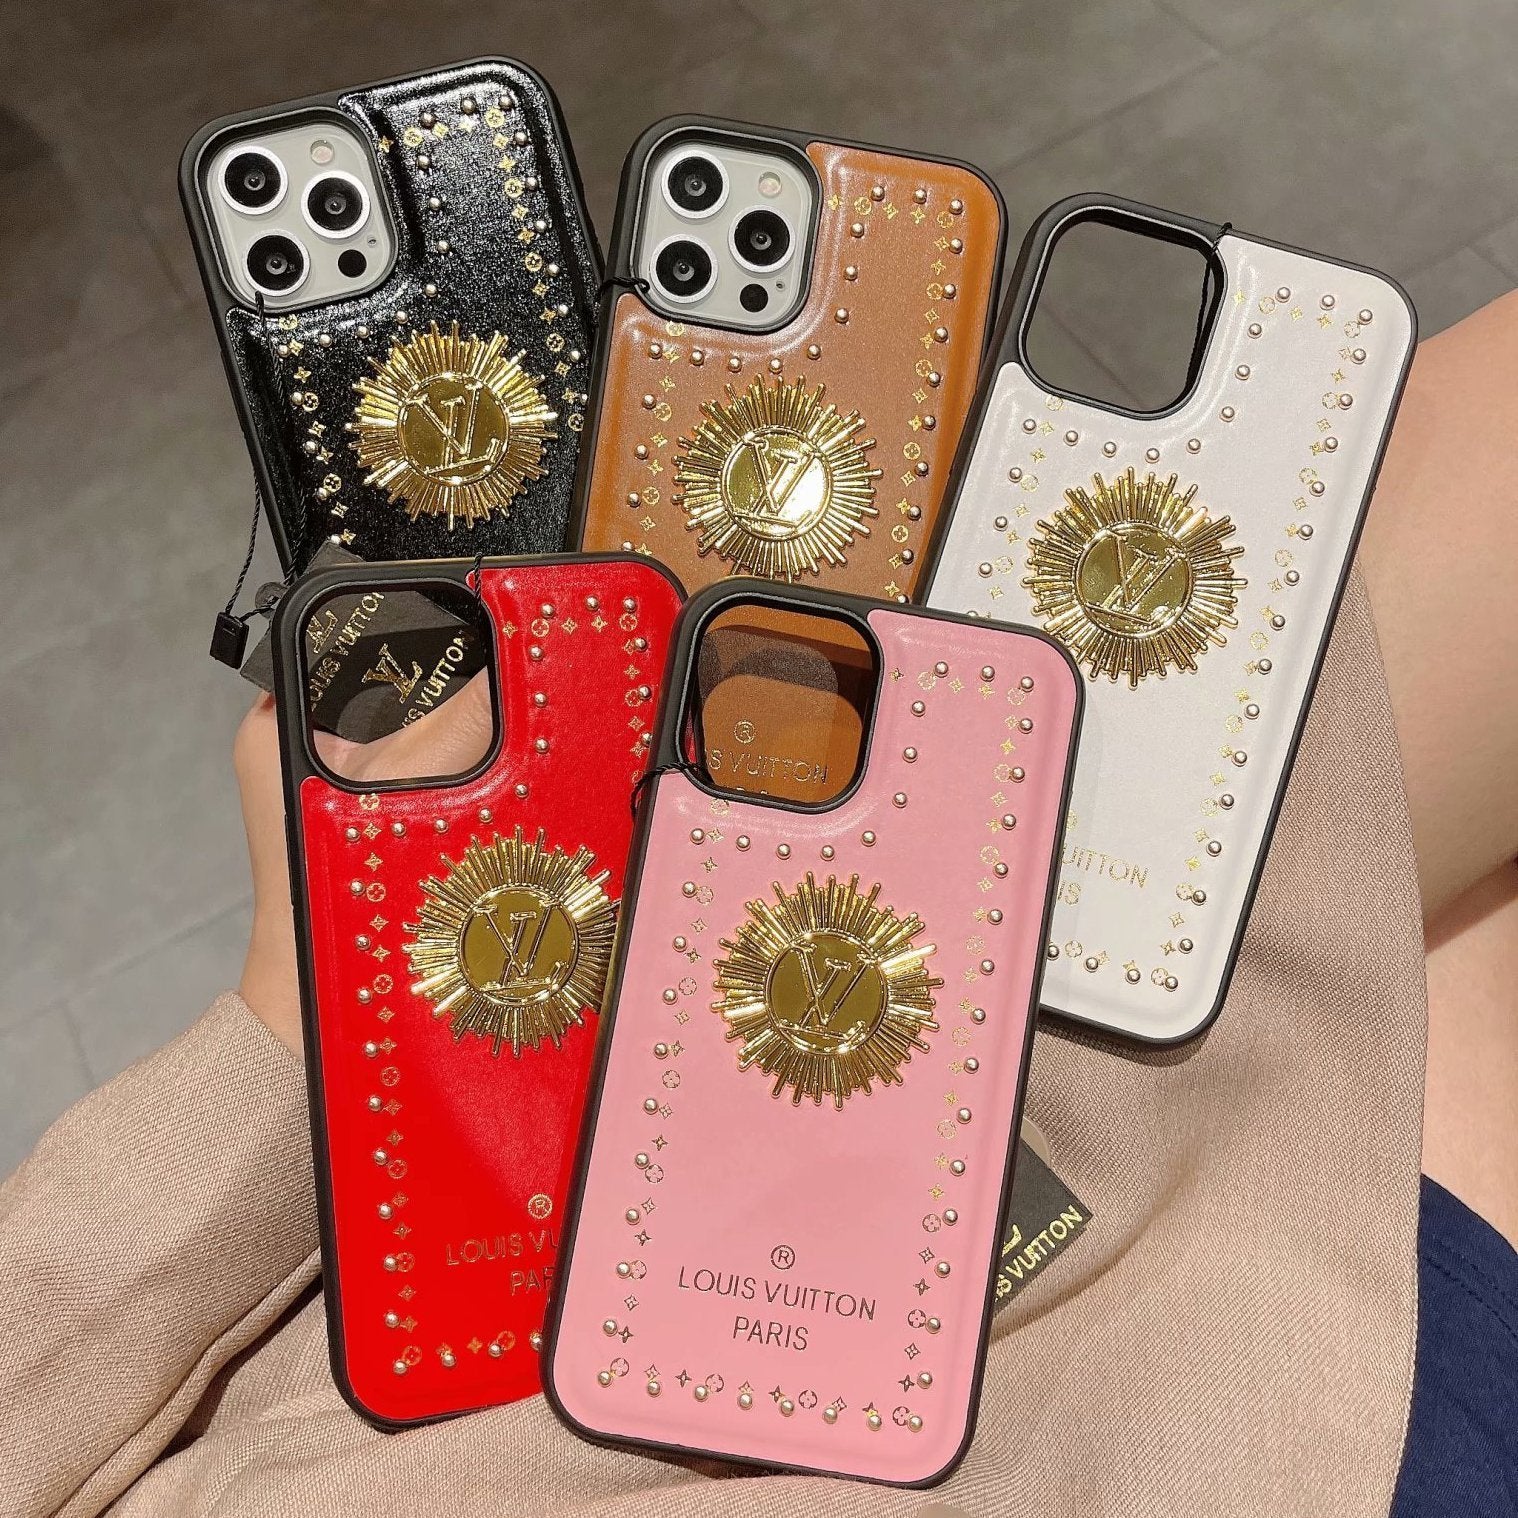 Louis Vuitton LV Fashion iPhone Phone Cover Case For iPhone 7 7p